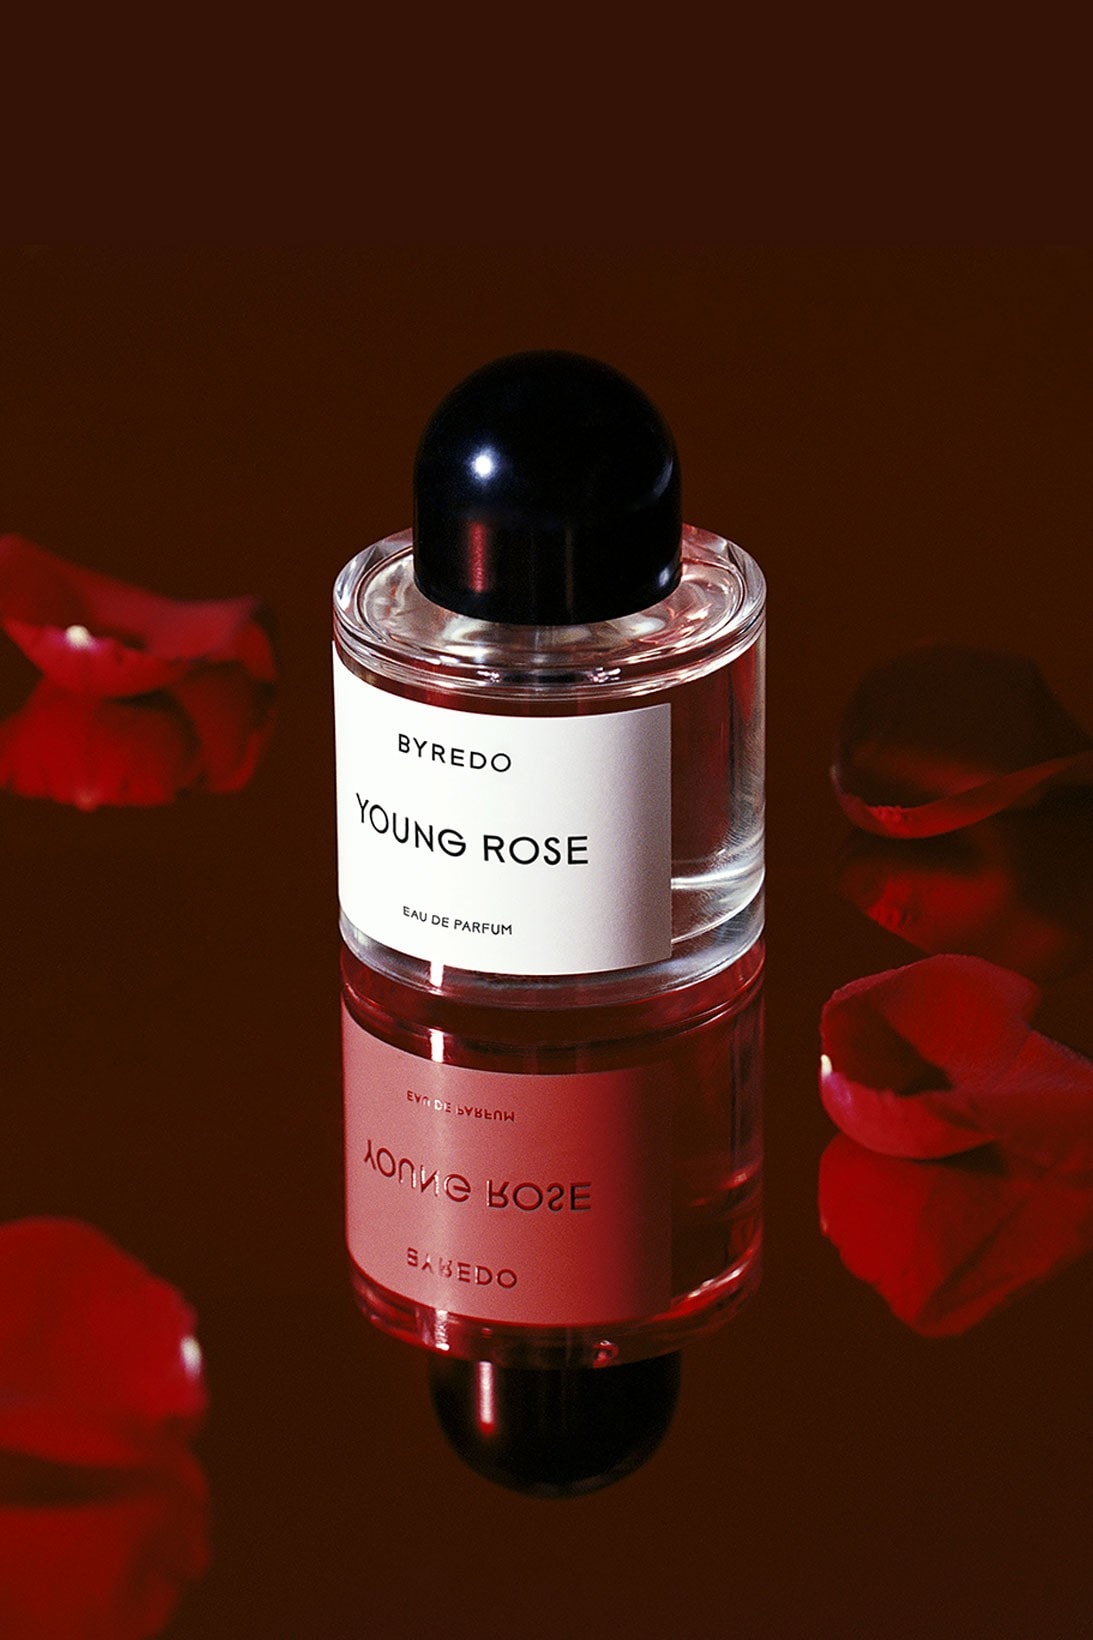 Byredo "Young Rose" Fragrance Unisex Perfume Ben Gorham Release Information Debut Scents Parfum Youth Culture Hong Kong K11 MUSEA